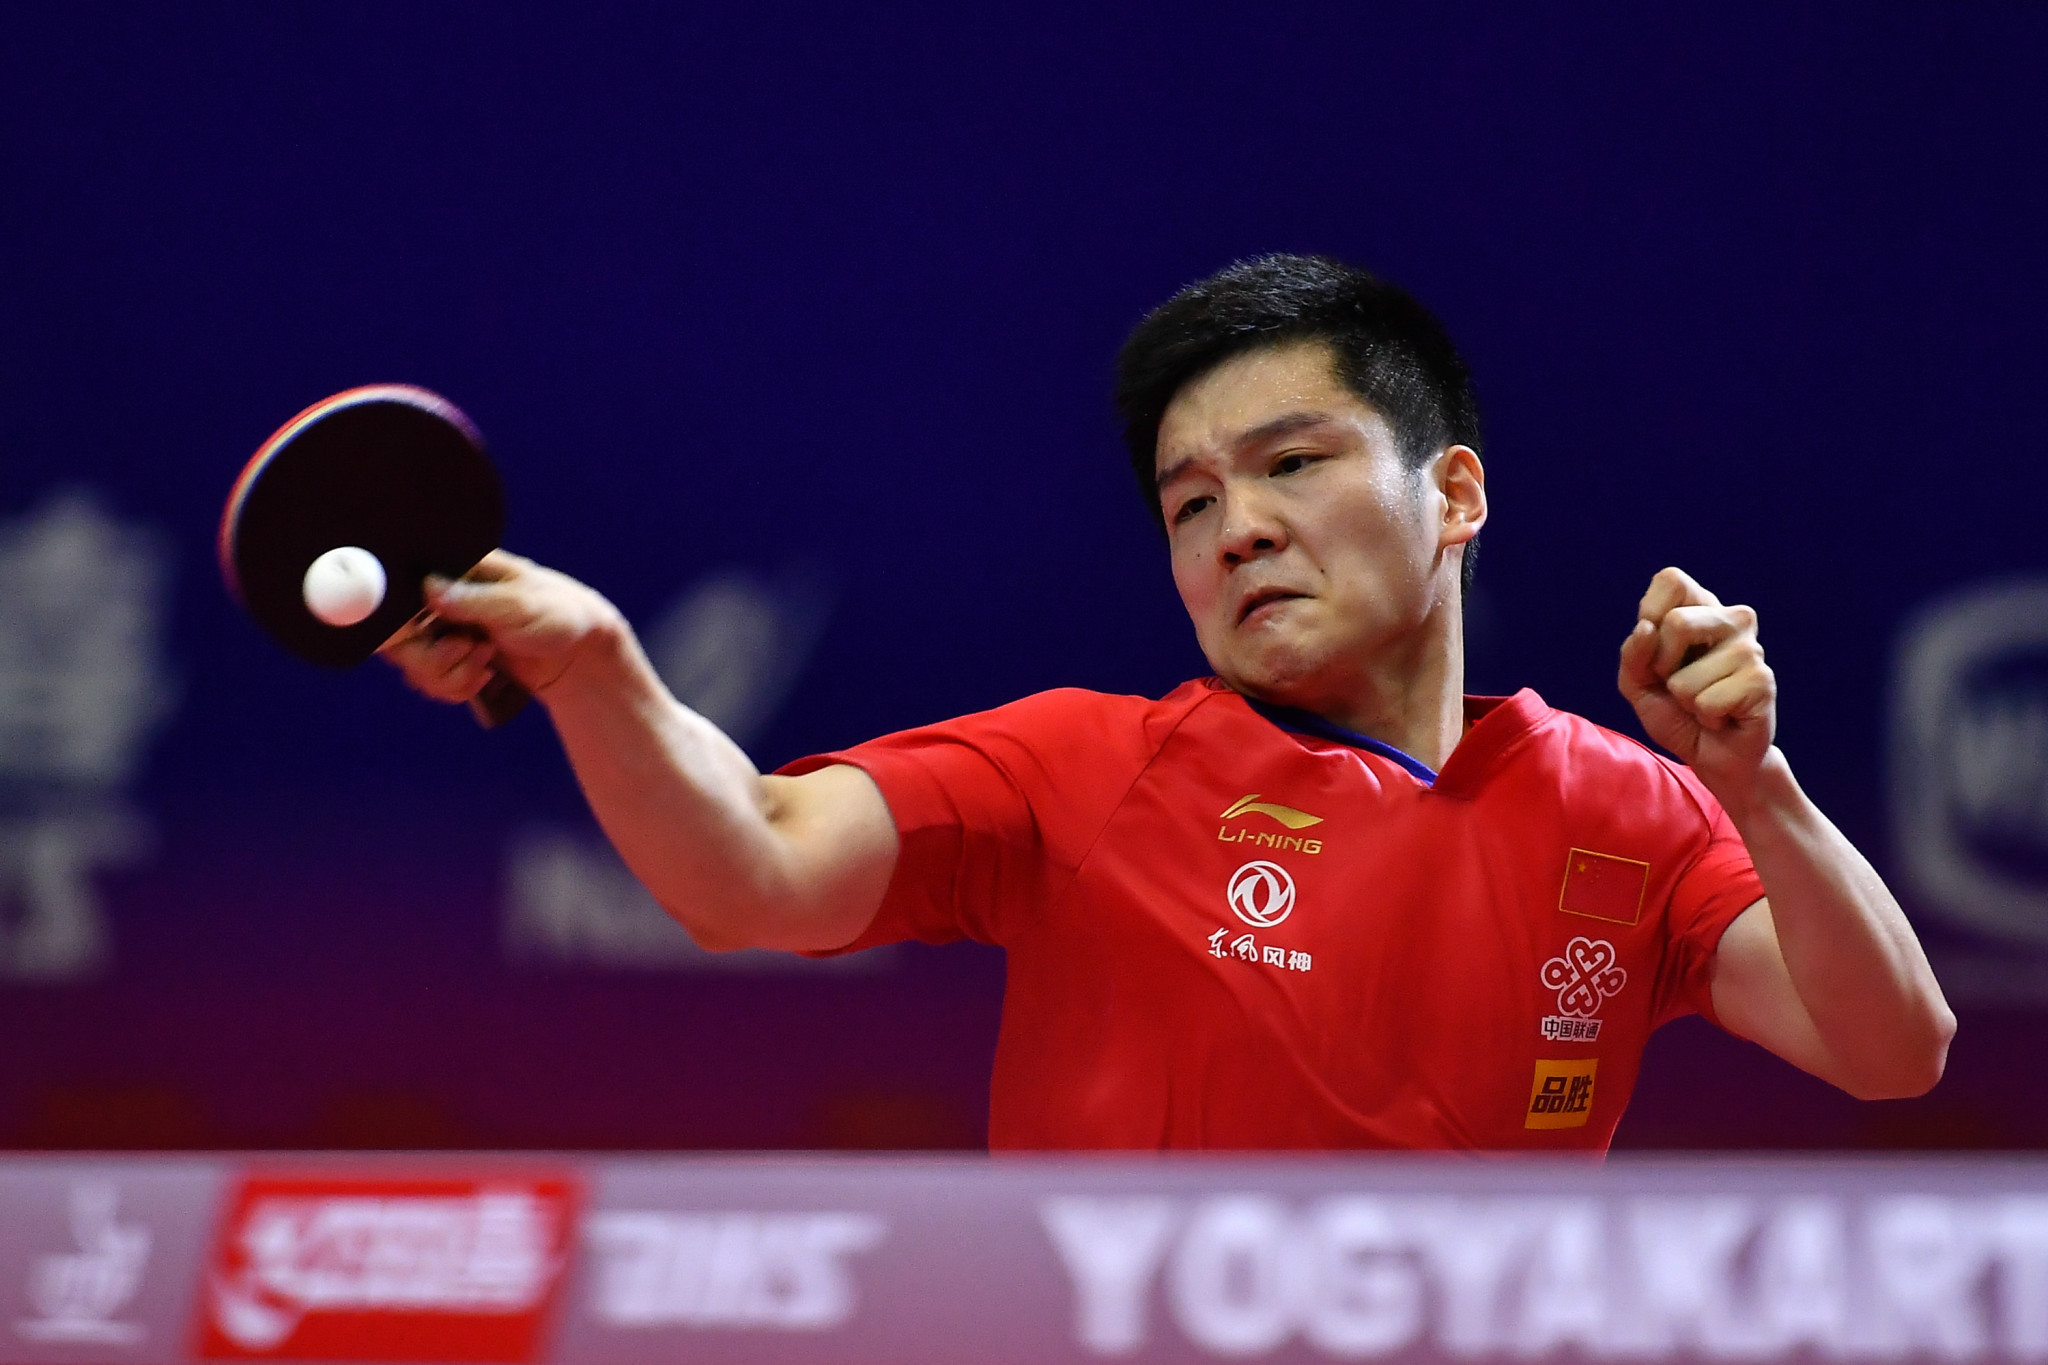 The next edition of the Asian Table Tennis Championships are set to be held in Qatar in 2021 ©Getty Images